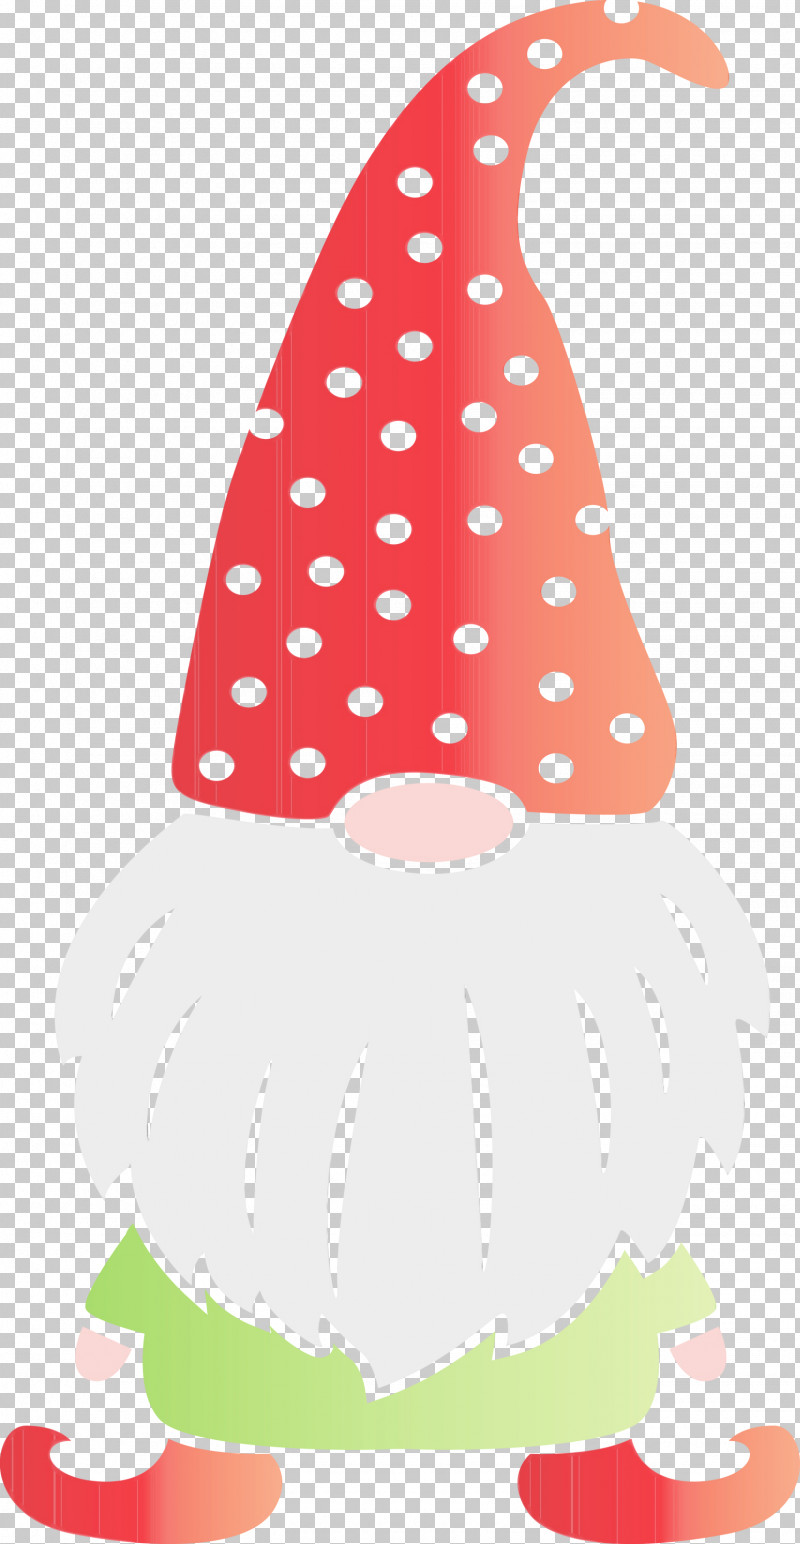 Polka Dot PNG, Clipart, Costume Accessory, Gnome, Mushroom, Paint, Party Hat Free PNG Download